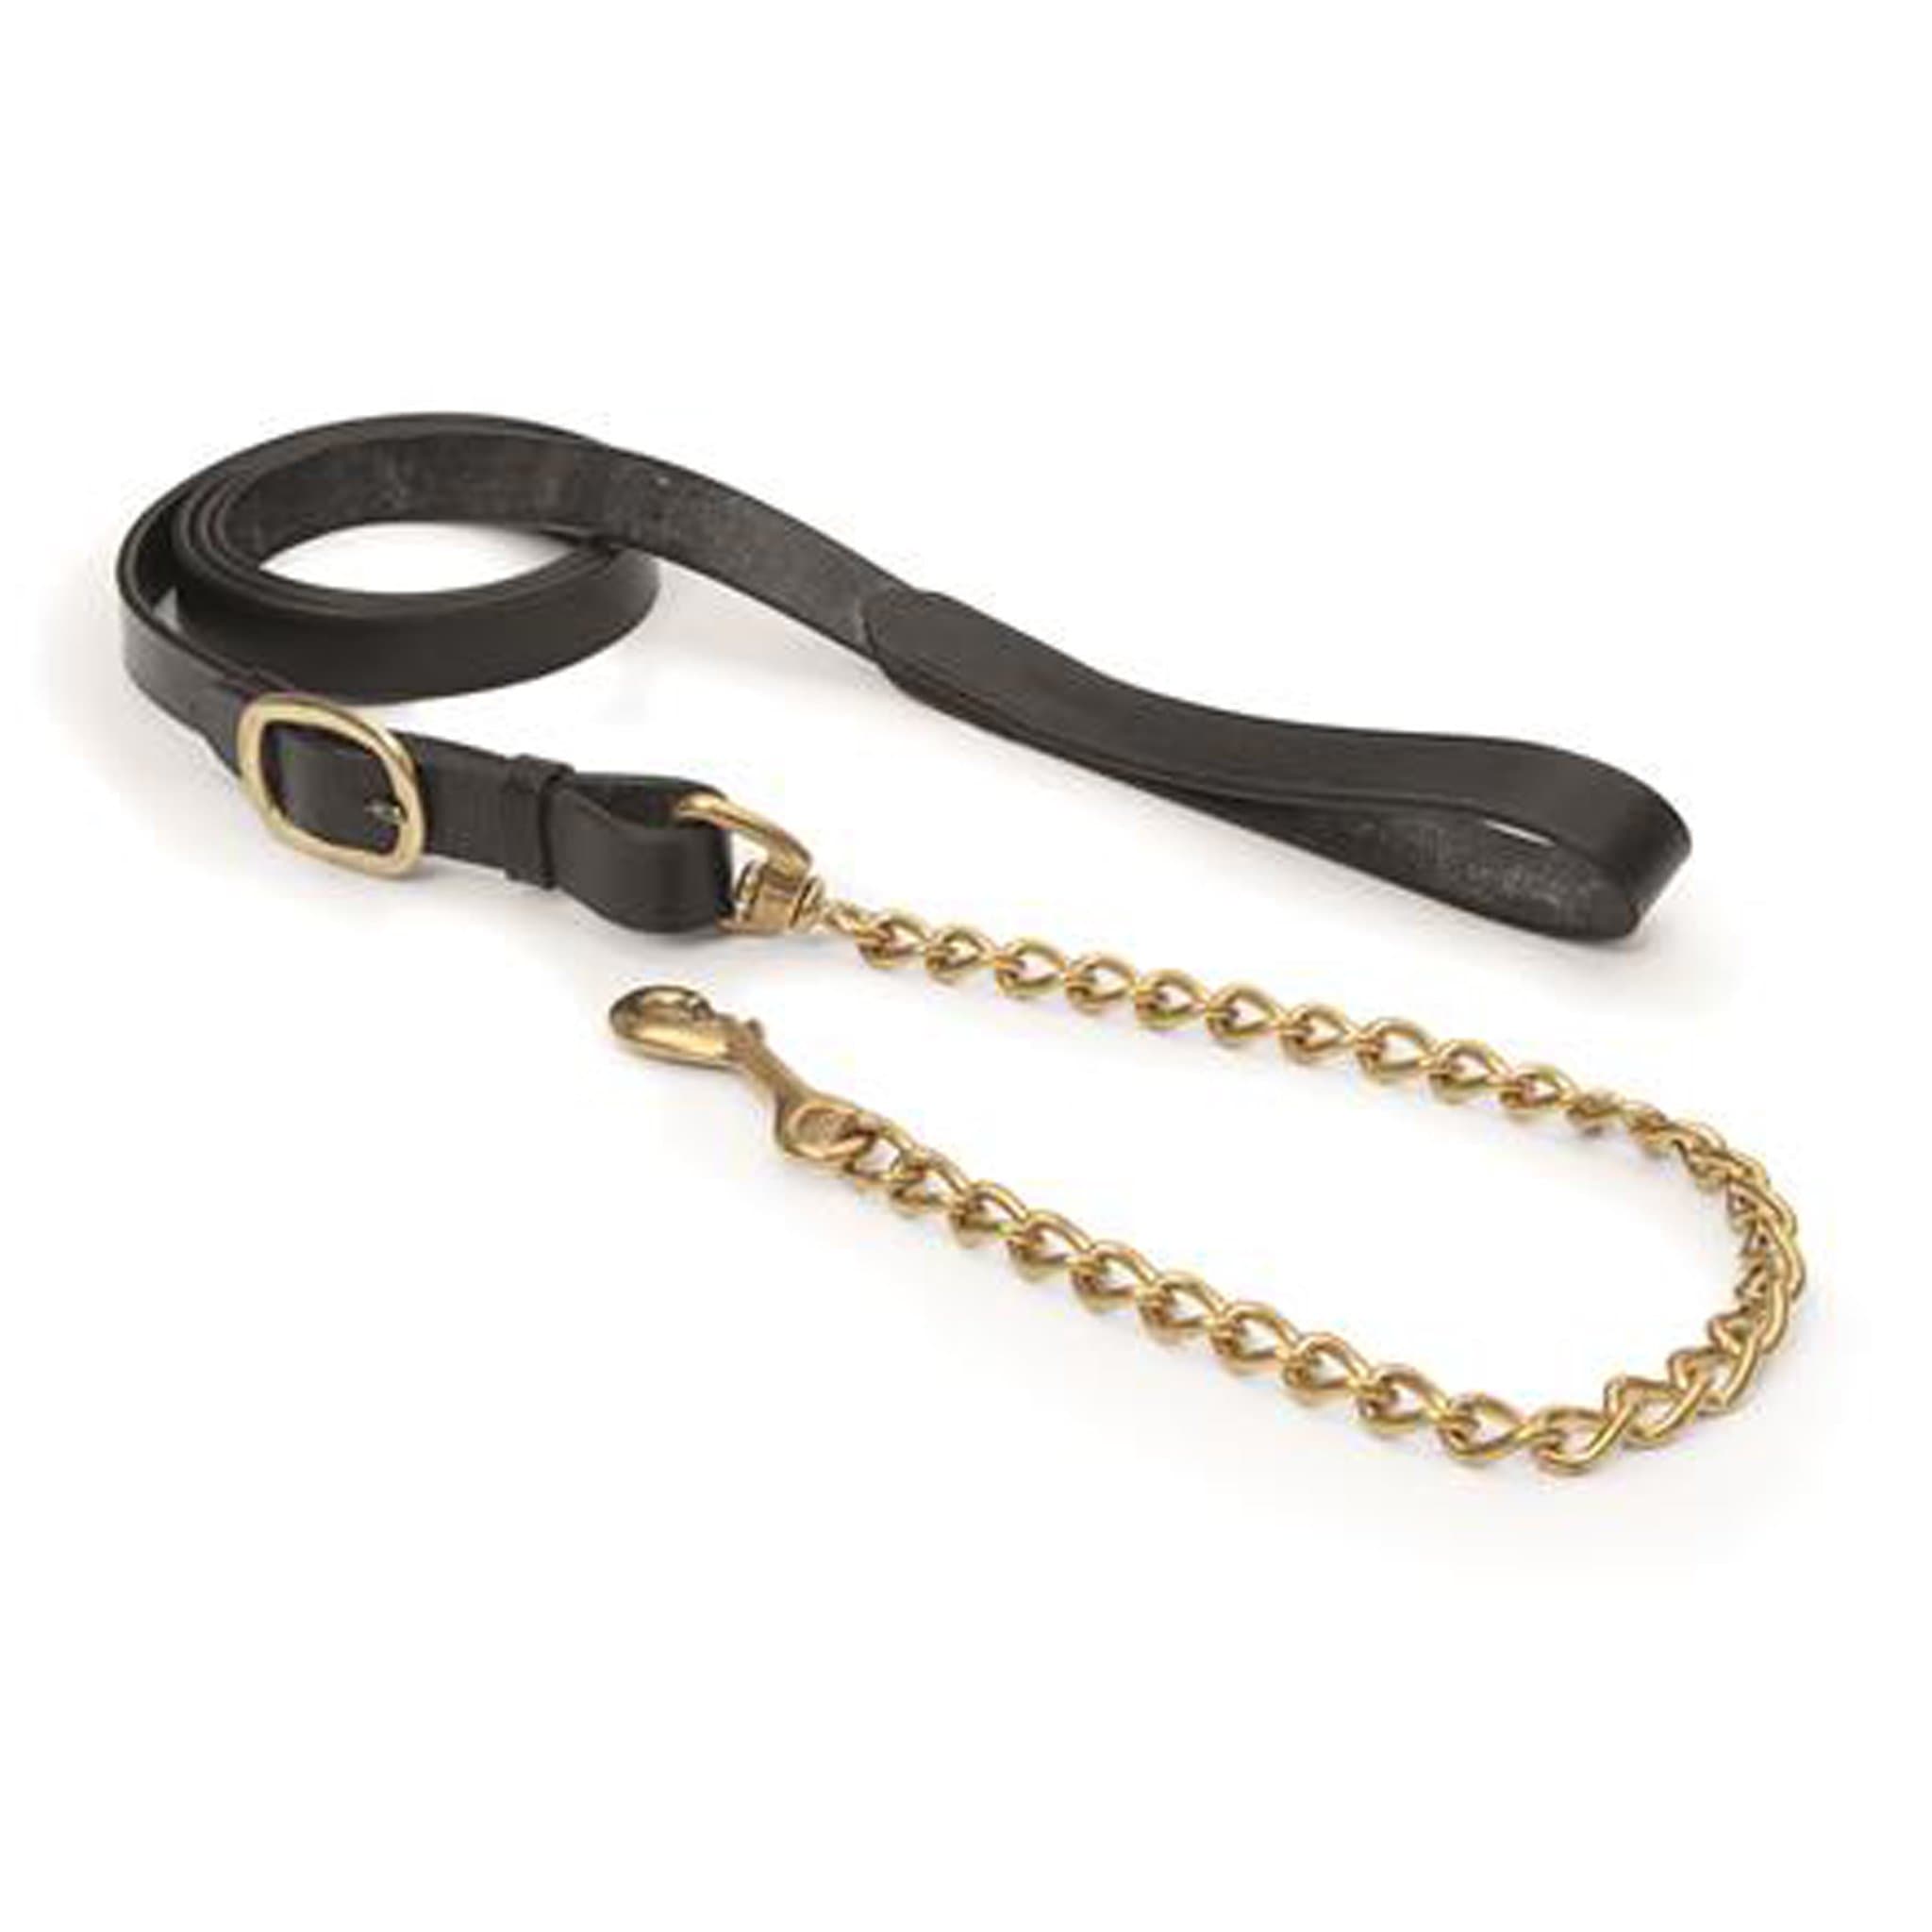 Shires Blenheim Leather Lead Rein with Chain 407A